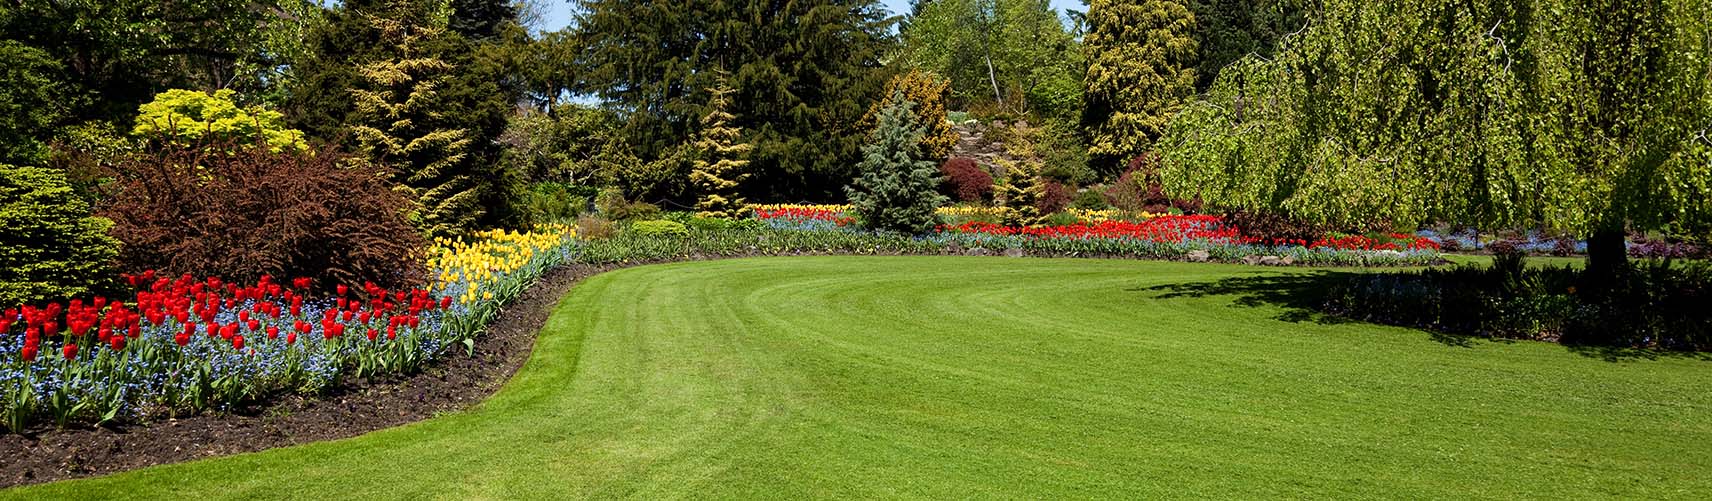 Plantation Lawn Care Services, Landscaping Company and Lawn Service